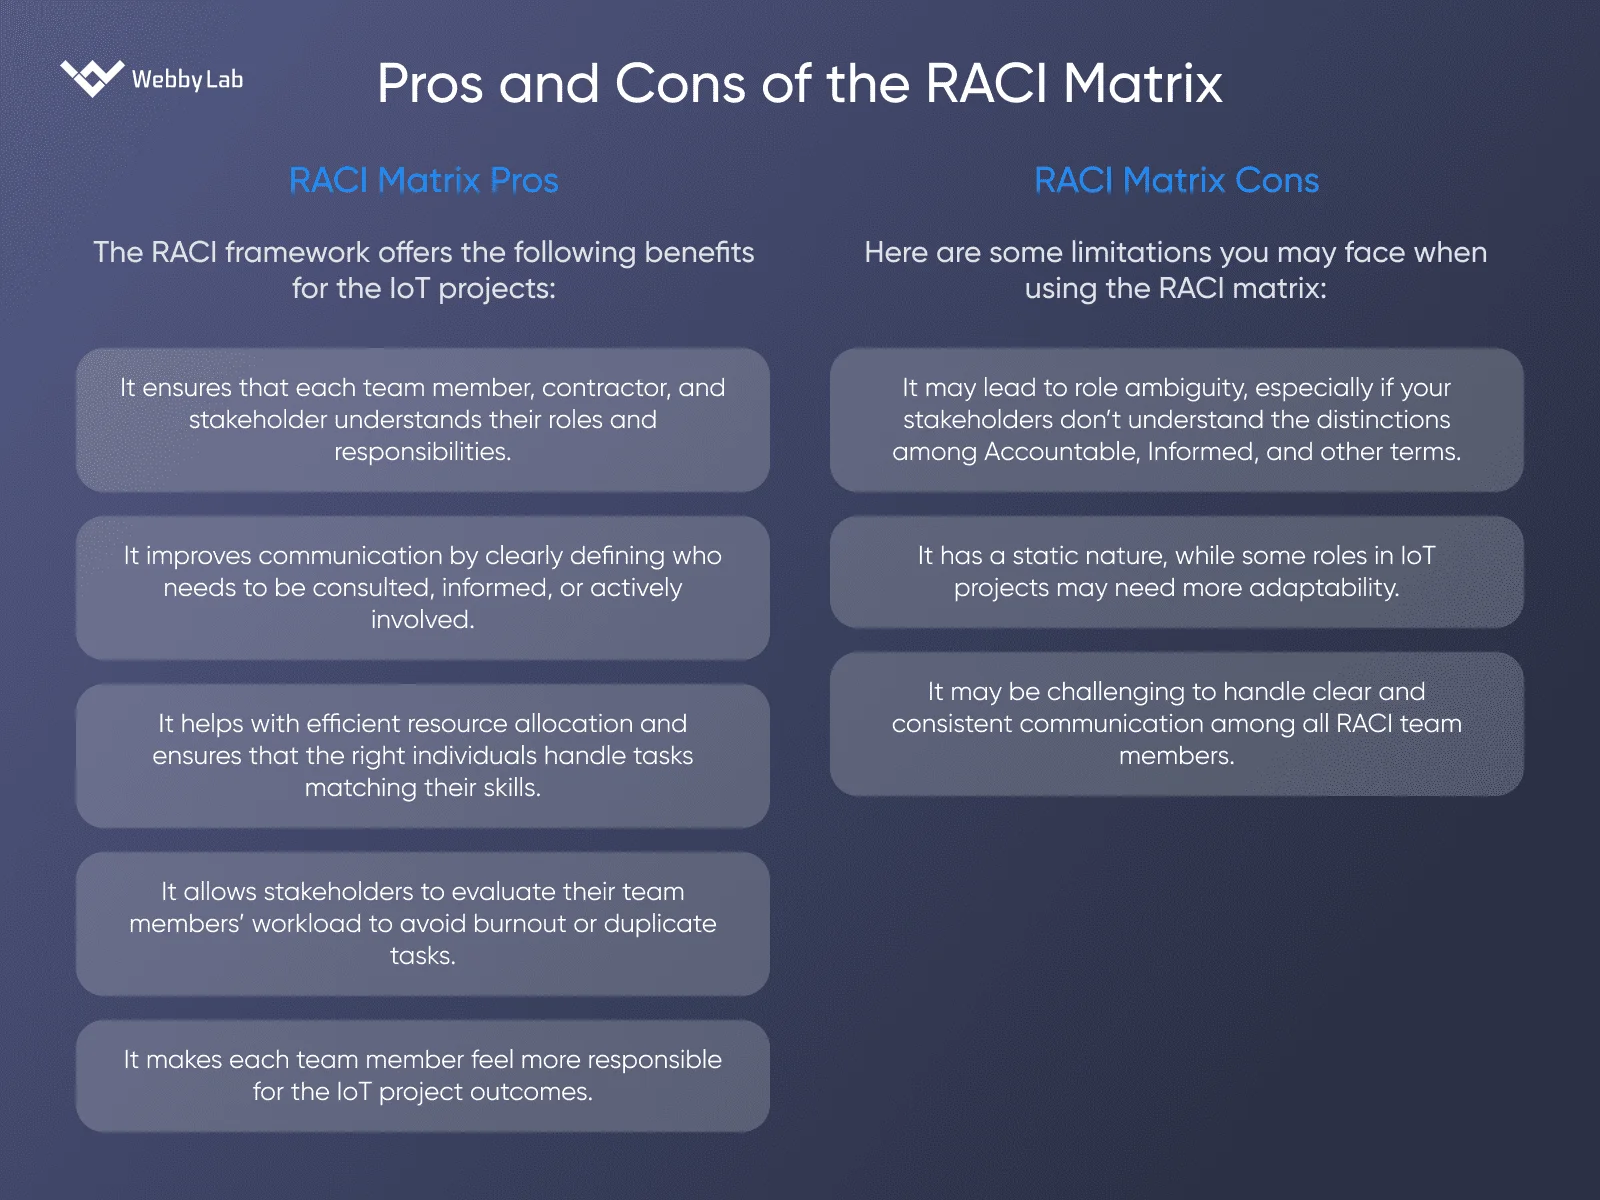 Pros and Cons of the RACI Matrix